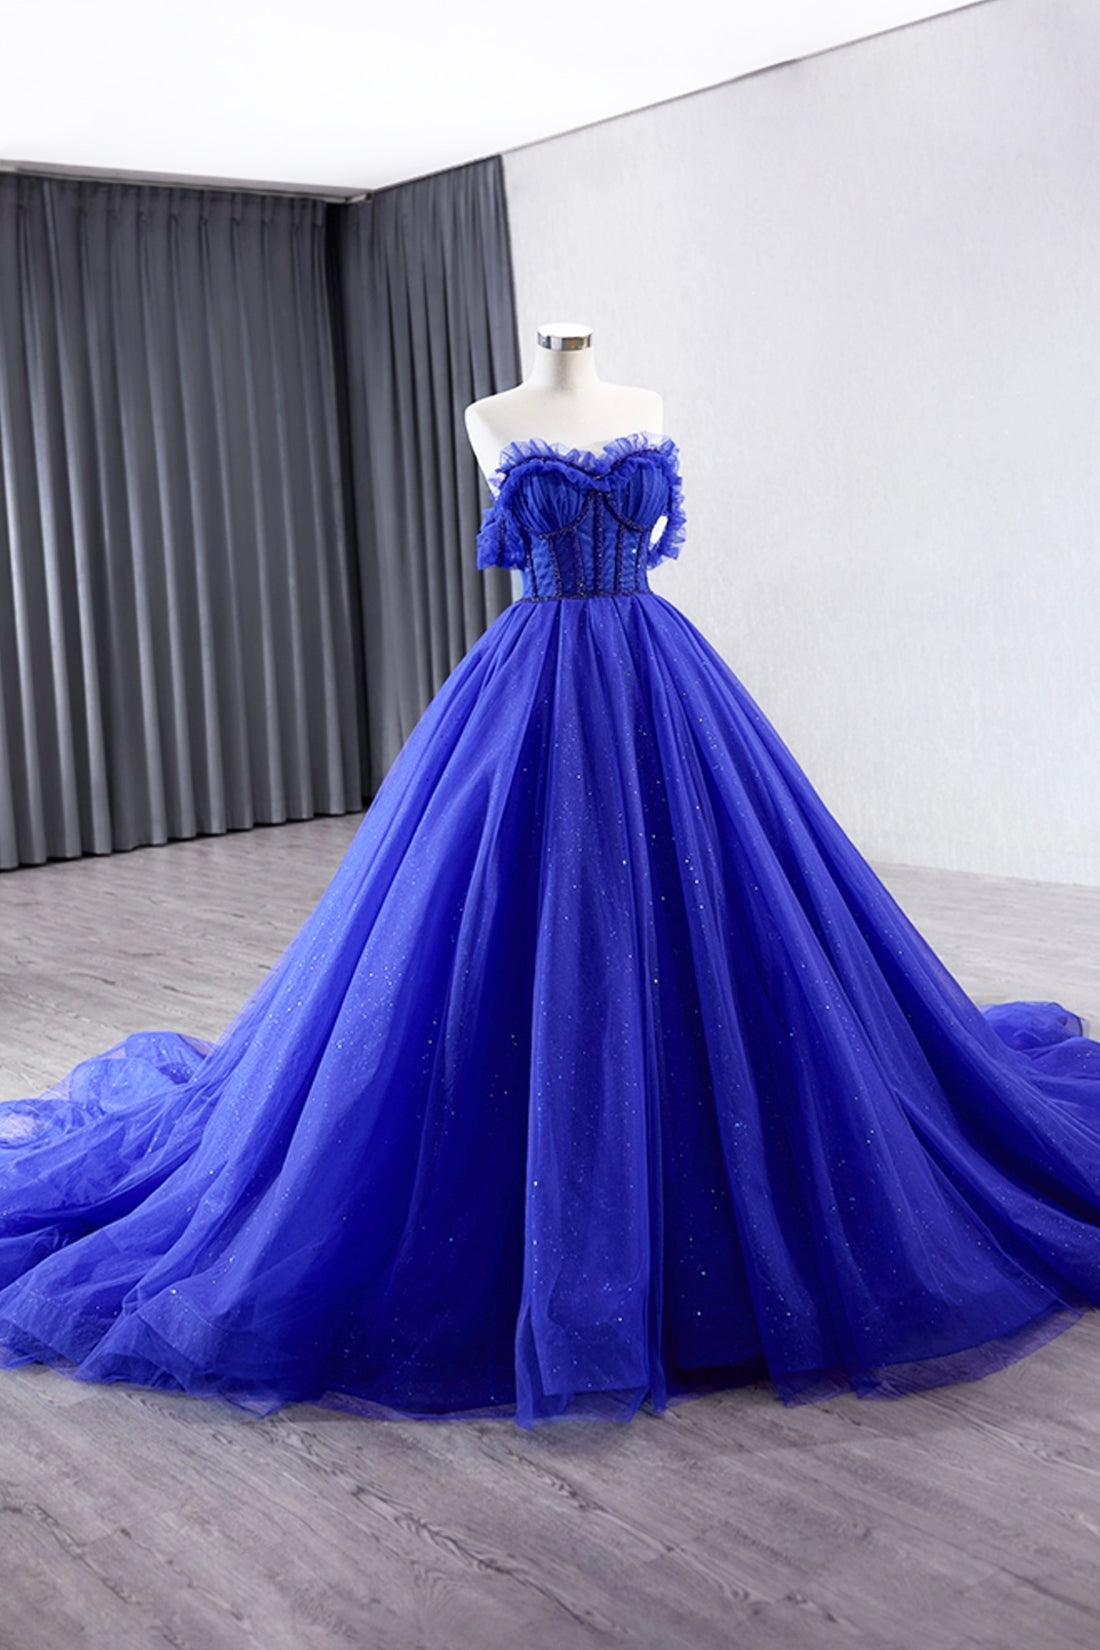 Blue Tulle Long Prom Dress, Off the Shoulder Formal Evening Party Dress